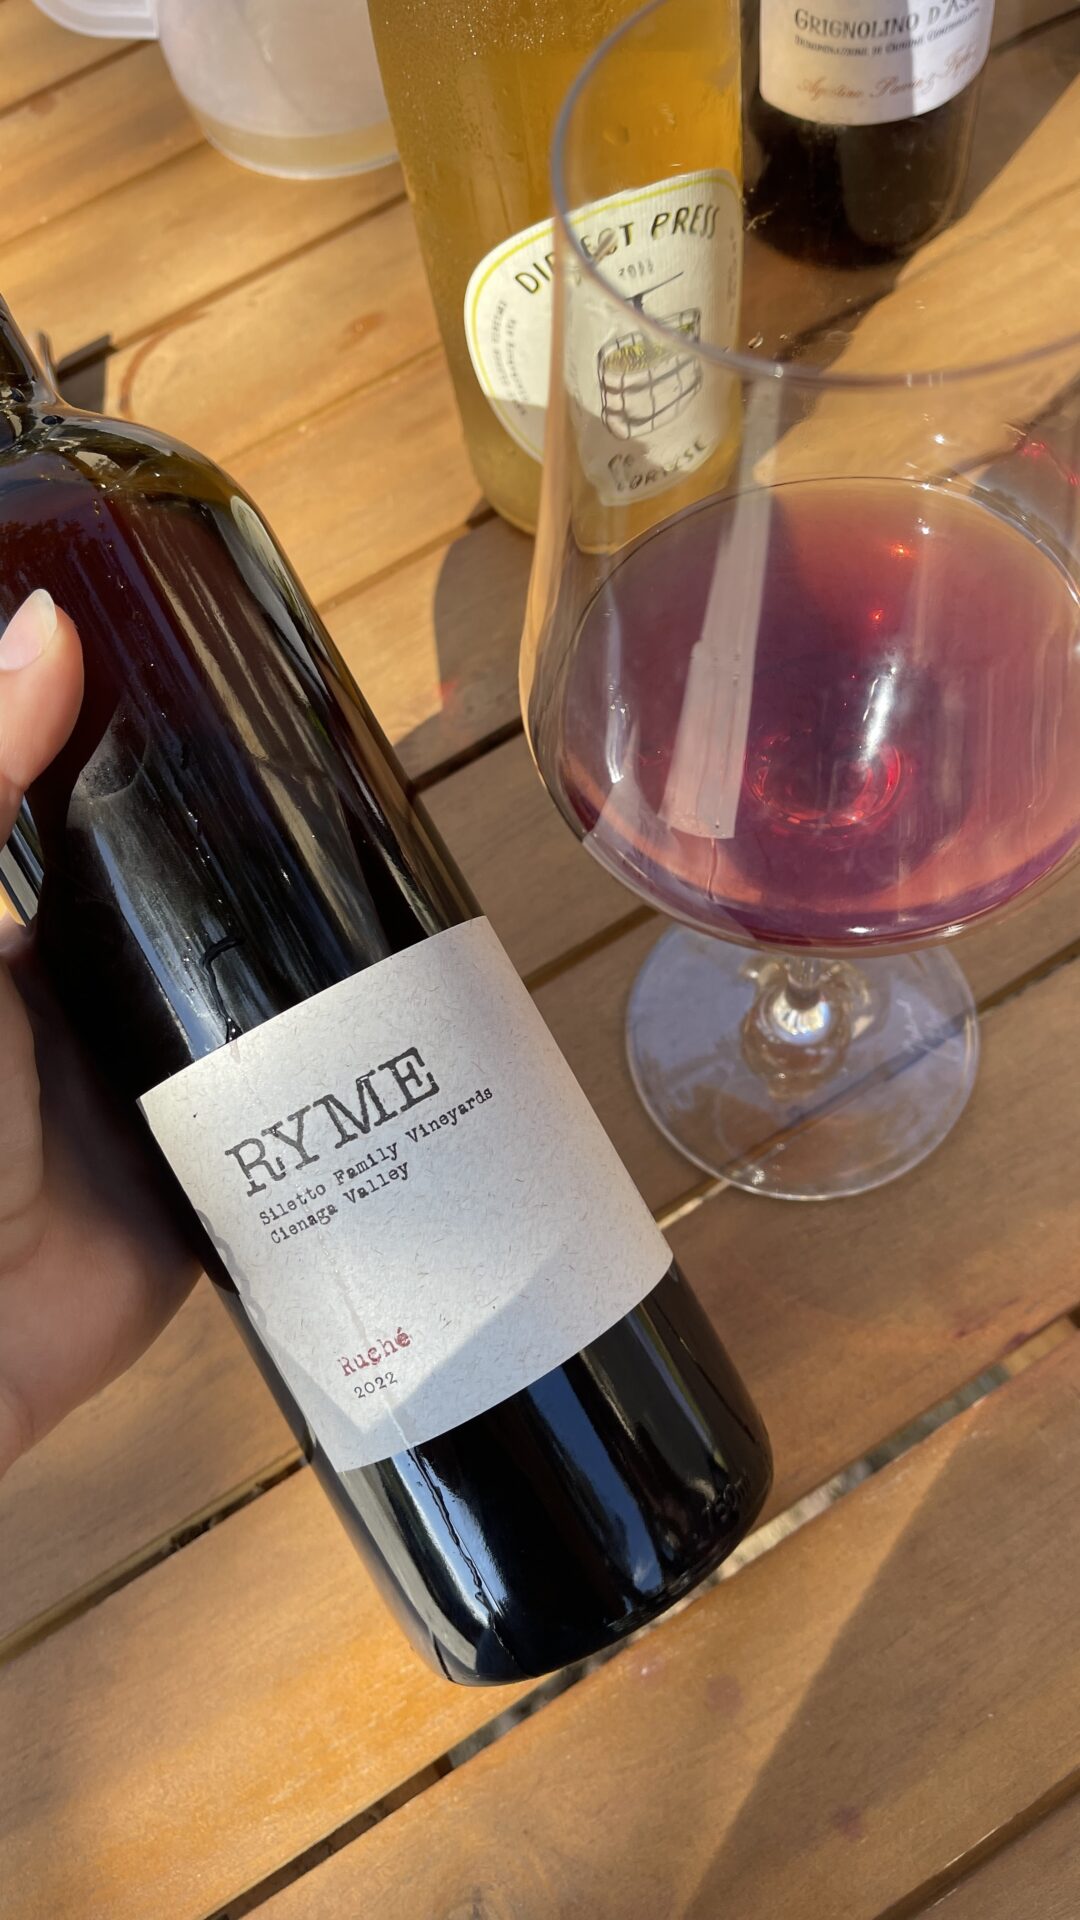 Ryme Wine bottle, from Naked Wines